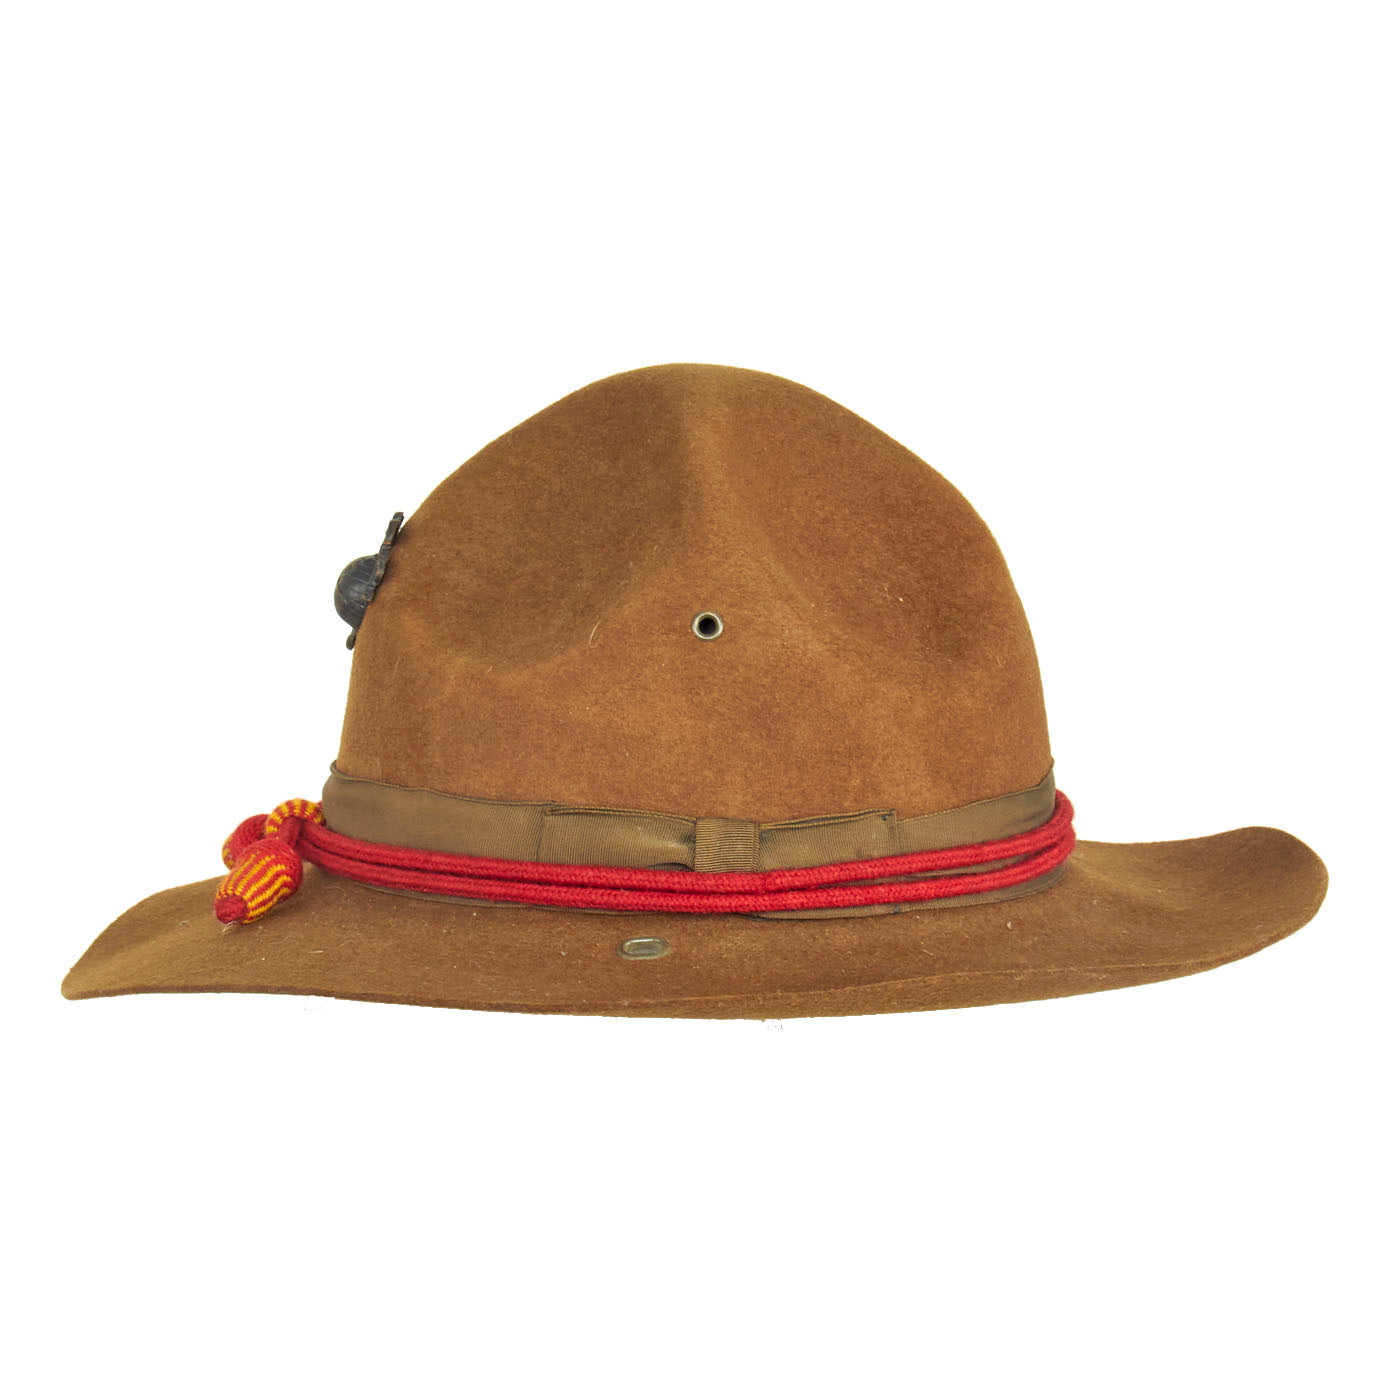 Early Official Boy Scout Campaign Hat (Smokey the Bear hat) by